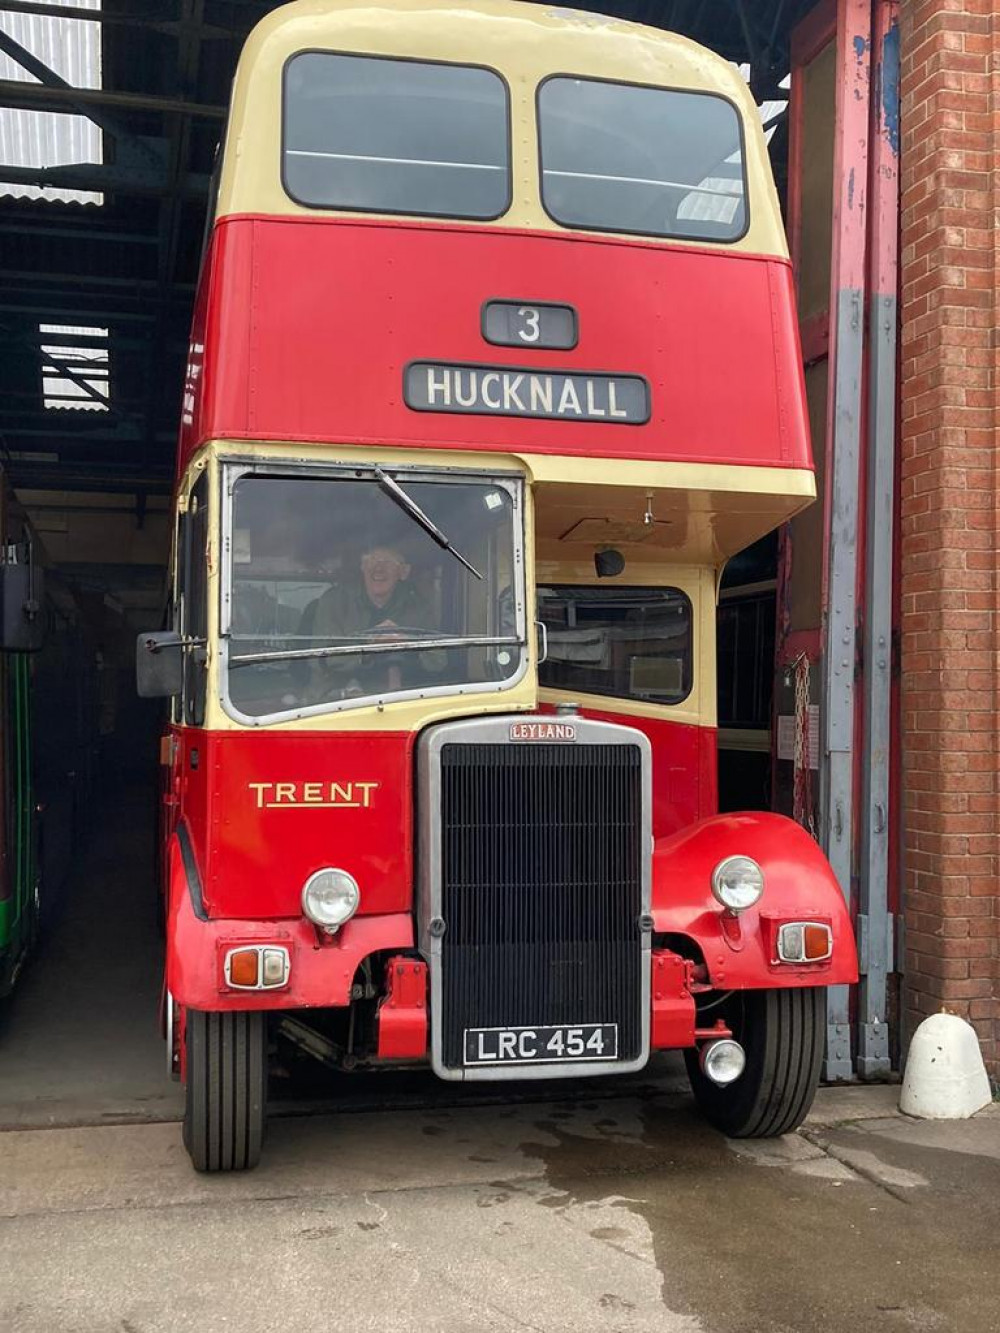 Take a look at what's happening in Hucknall today. Photo Credit: Hucknall Nub News.